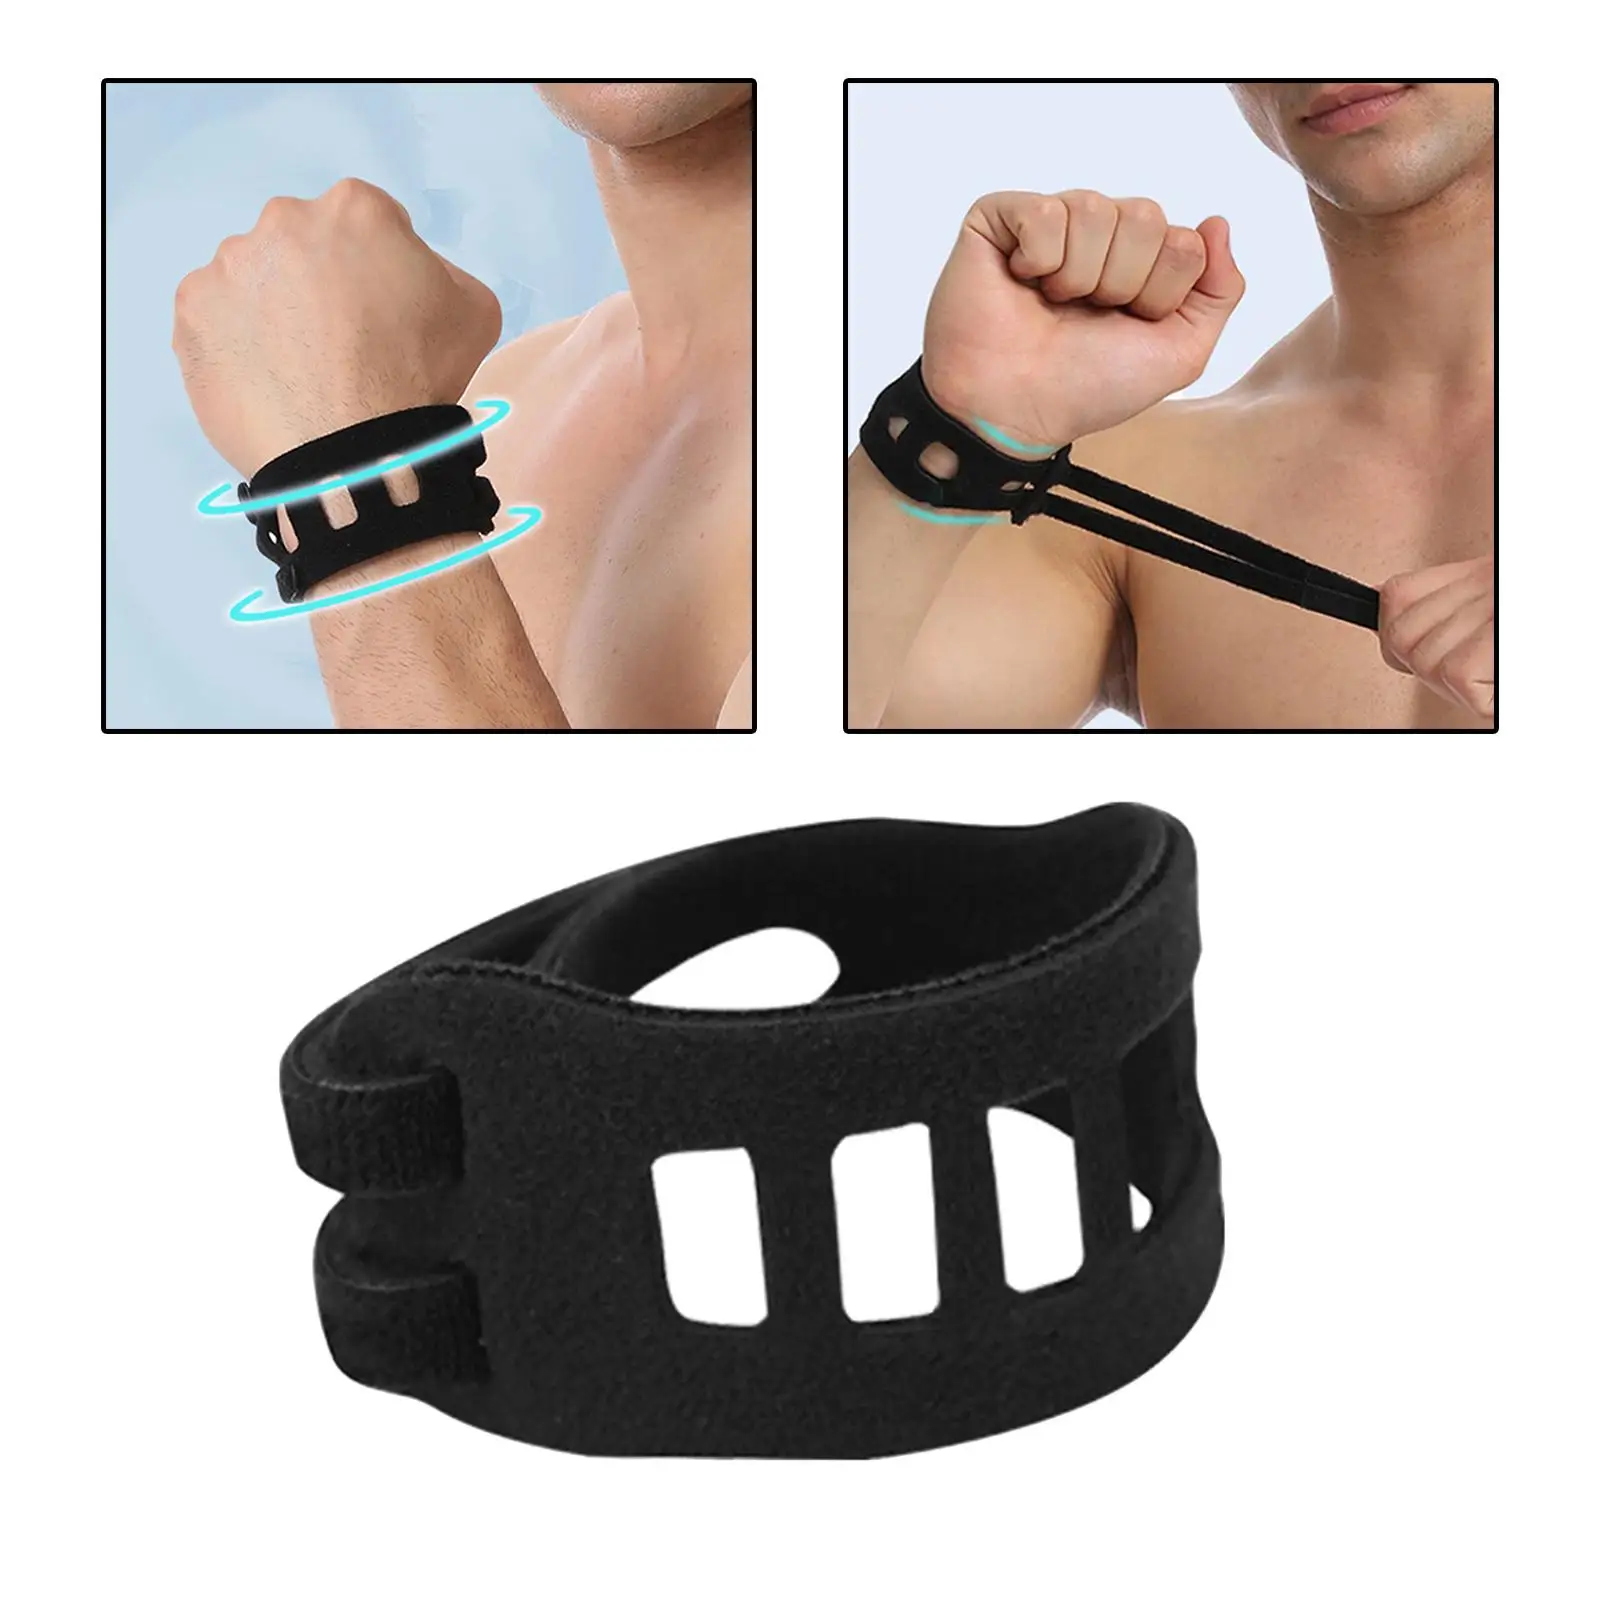 Tfcc Wrist Brace Ulnar Sided Wrist Pain Soft Wrist Band Support for Basketball Fitness Yoga Left and Right Hand Carpal Tunnel